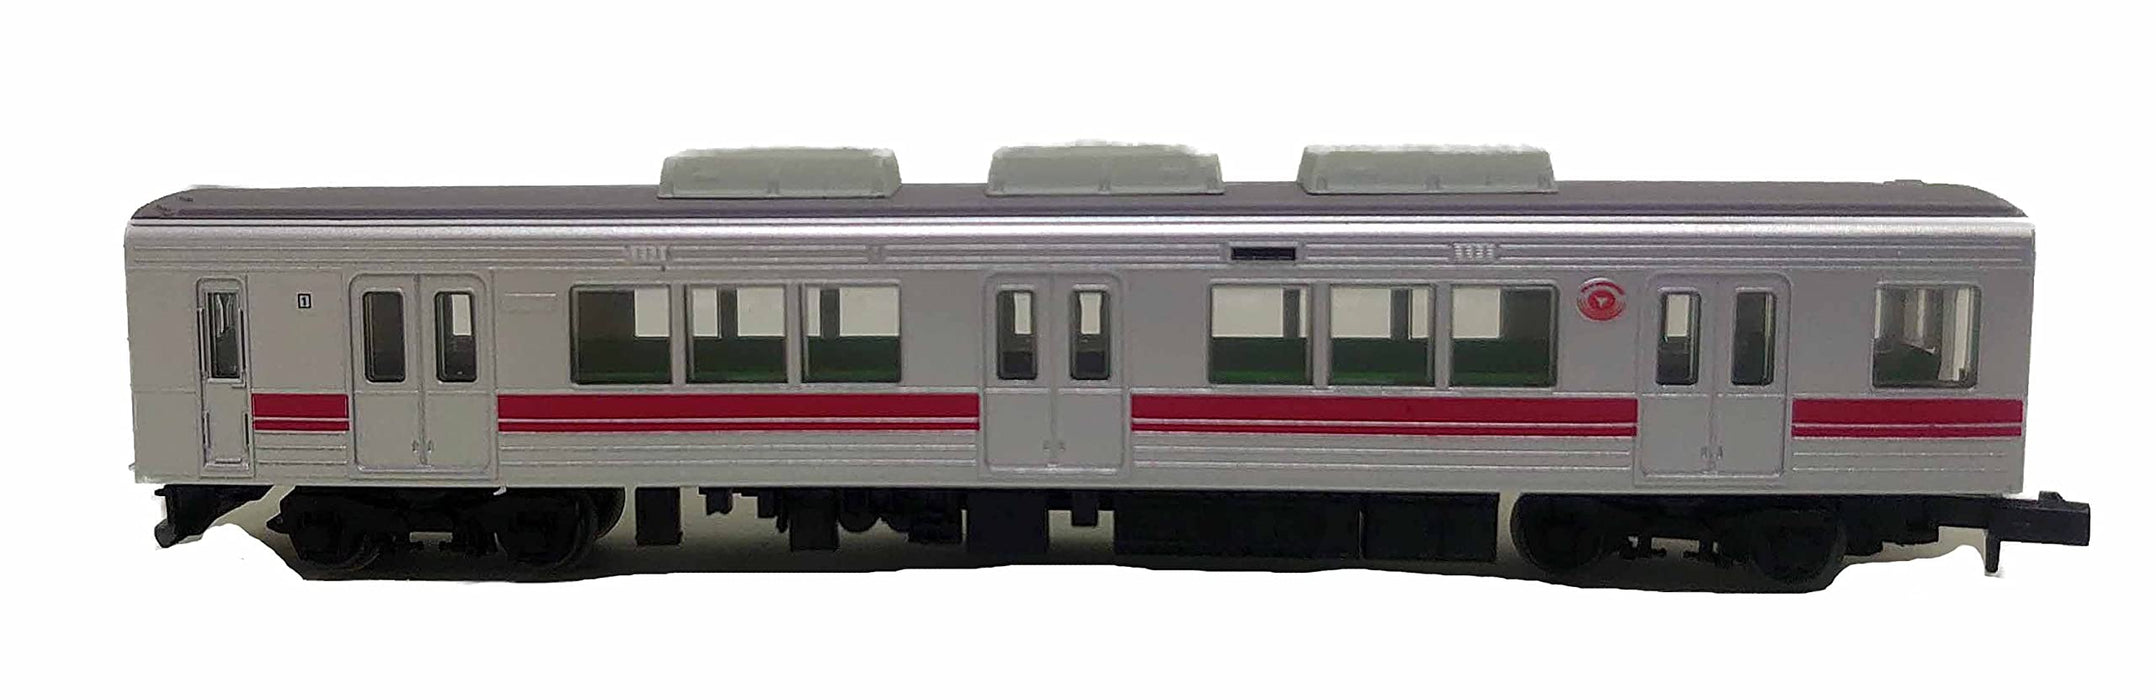 Tomytec Railway Collection 1000 Series 3-Car Set from Tokyu Corporation